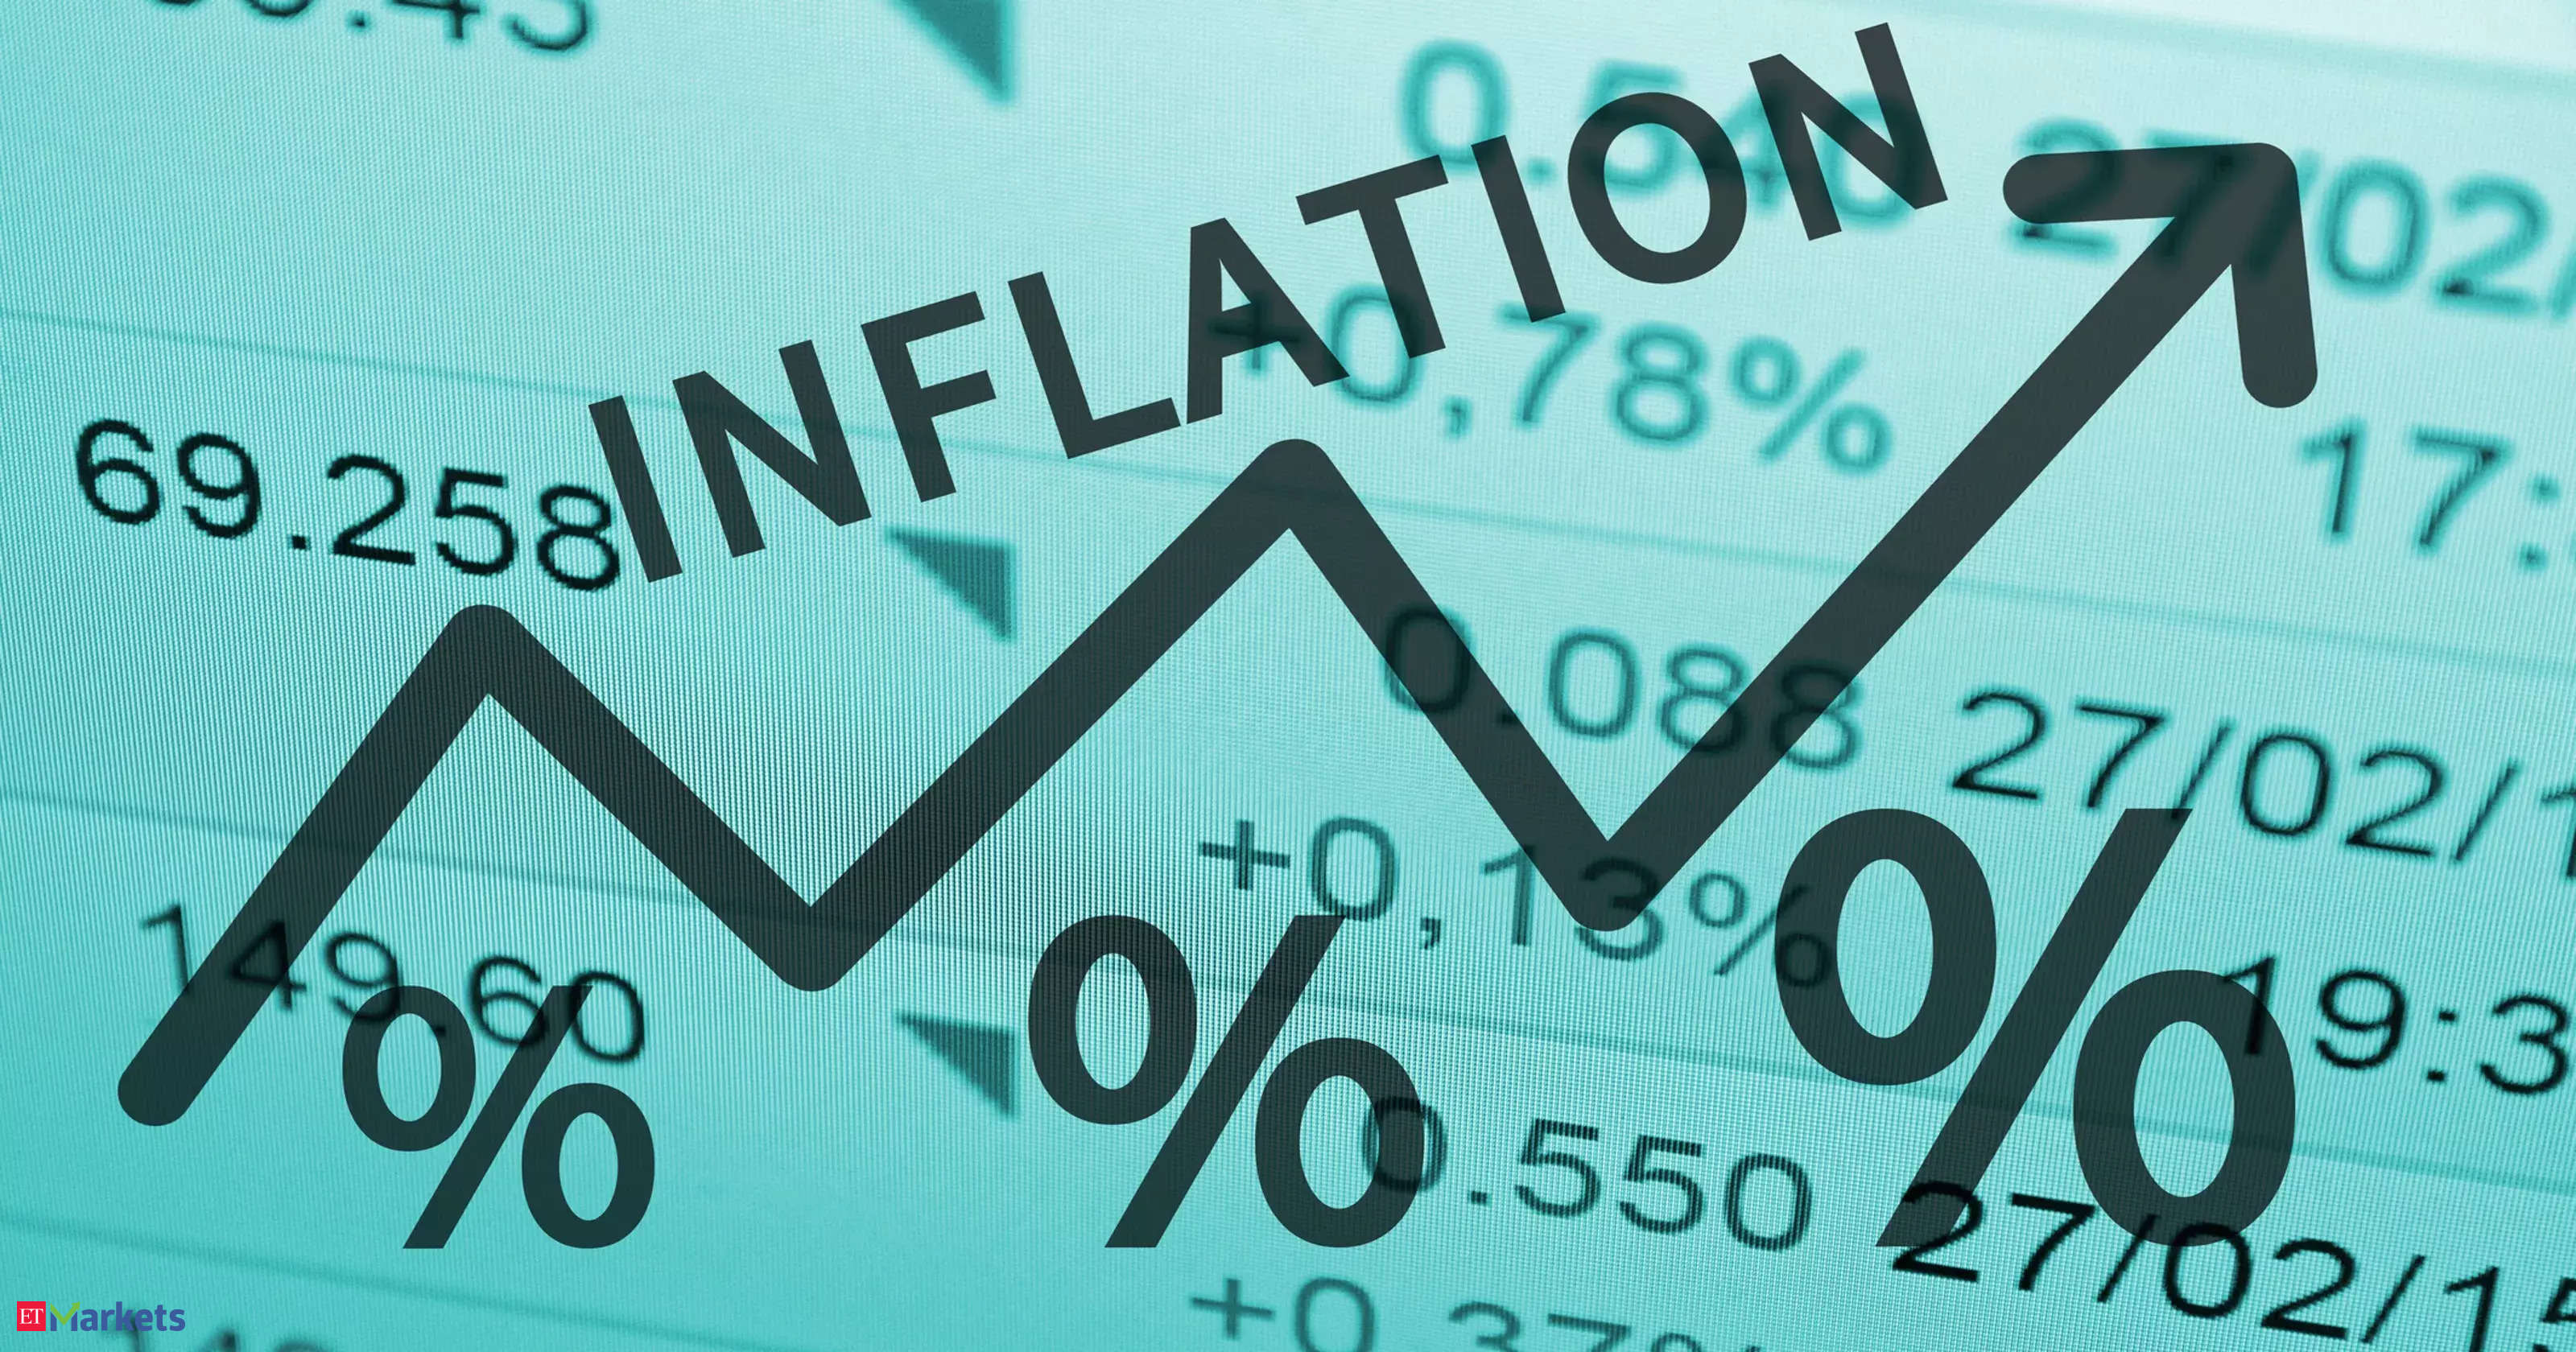 cpi inflation: inflation@40-year high! this treasury head highlights 4 reasons why - the economic times